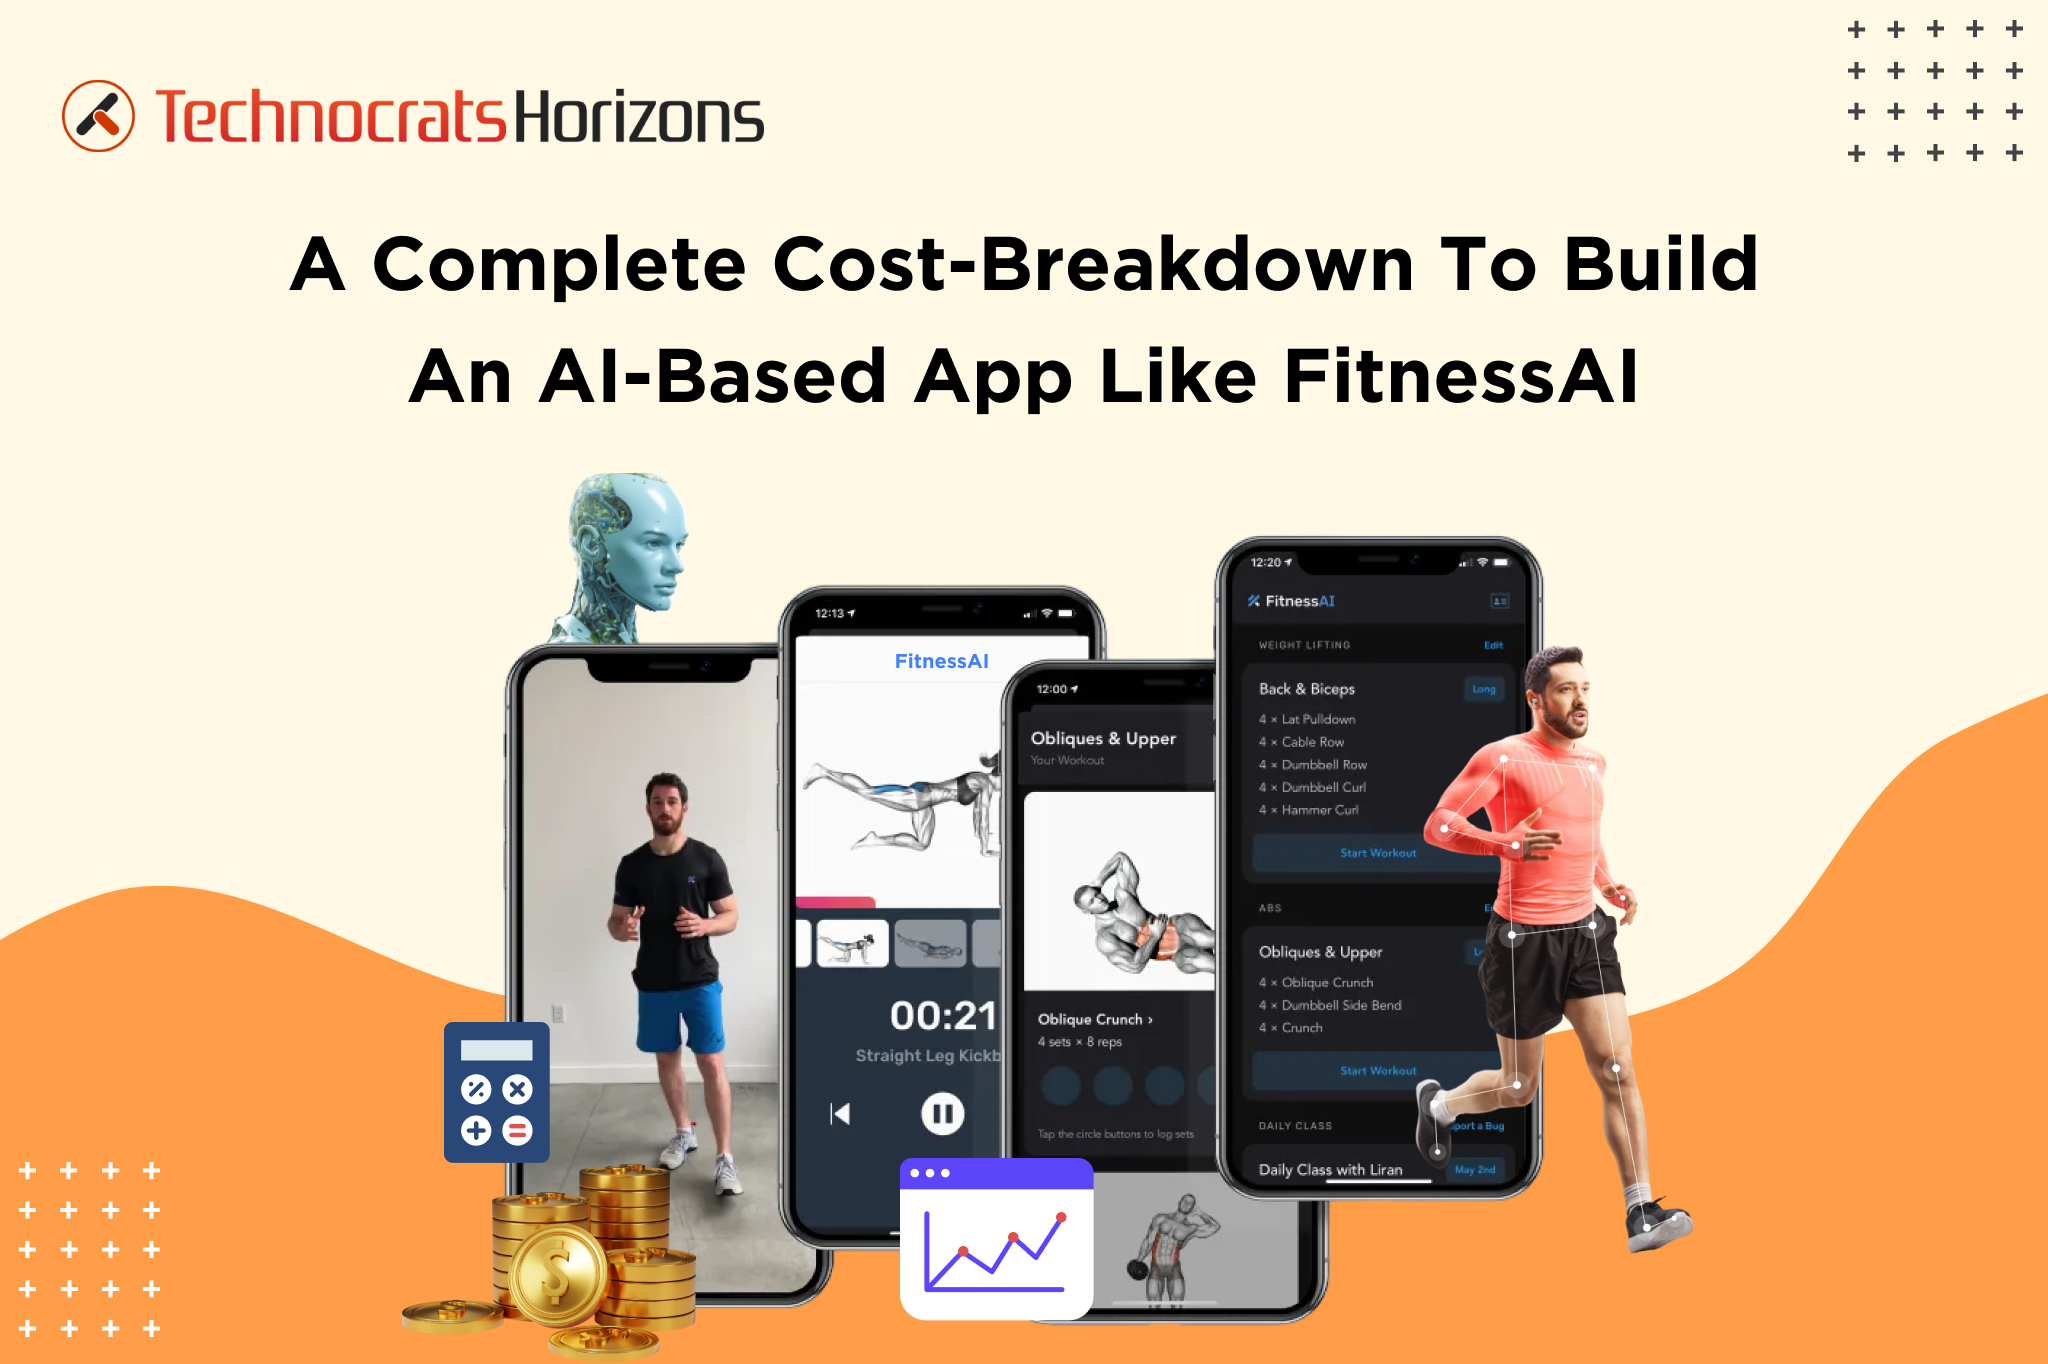 How Much It Costs to Build an AI-Based Fitness App Like FitnessAI?